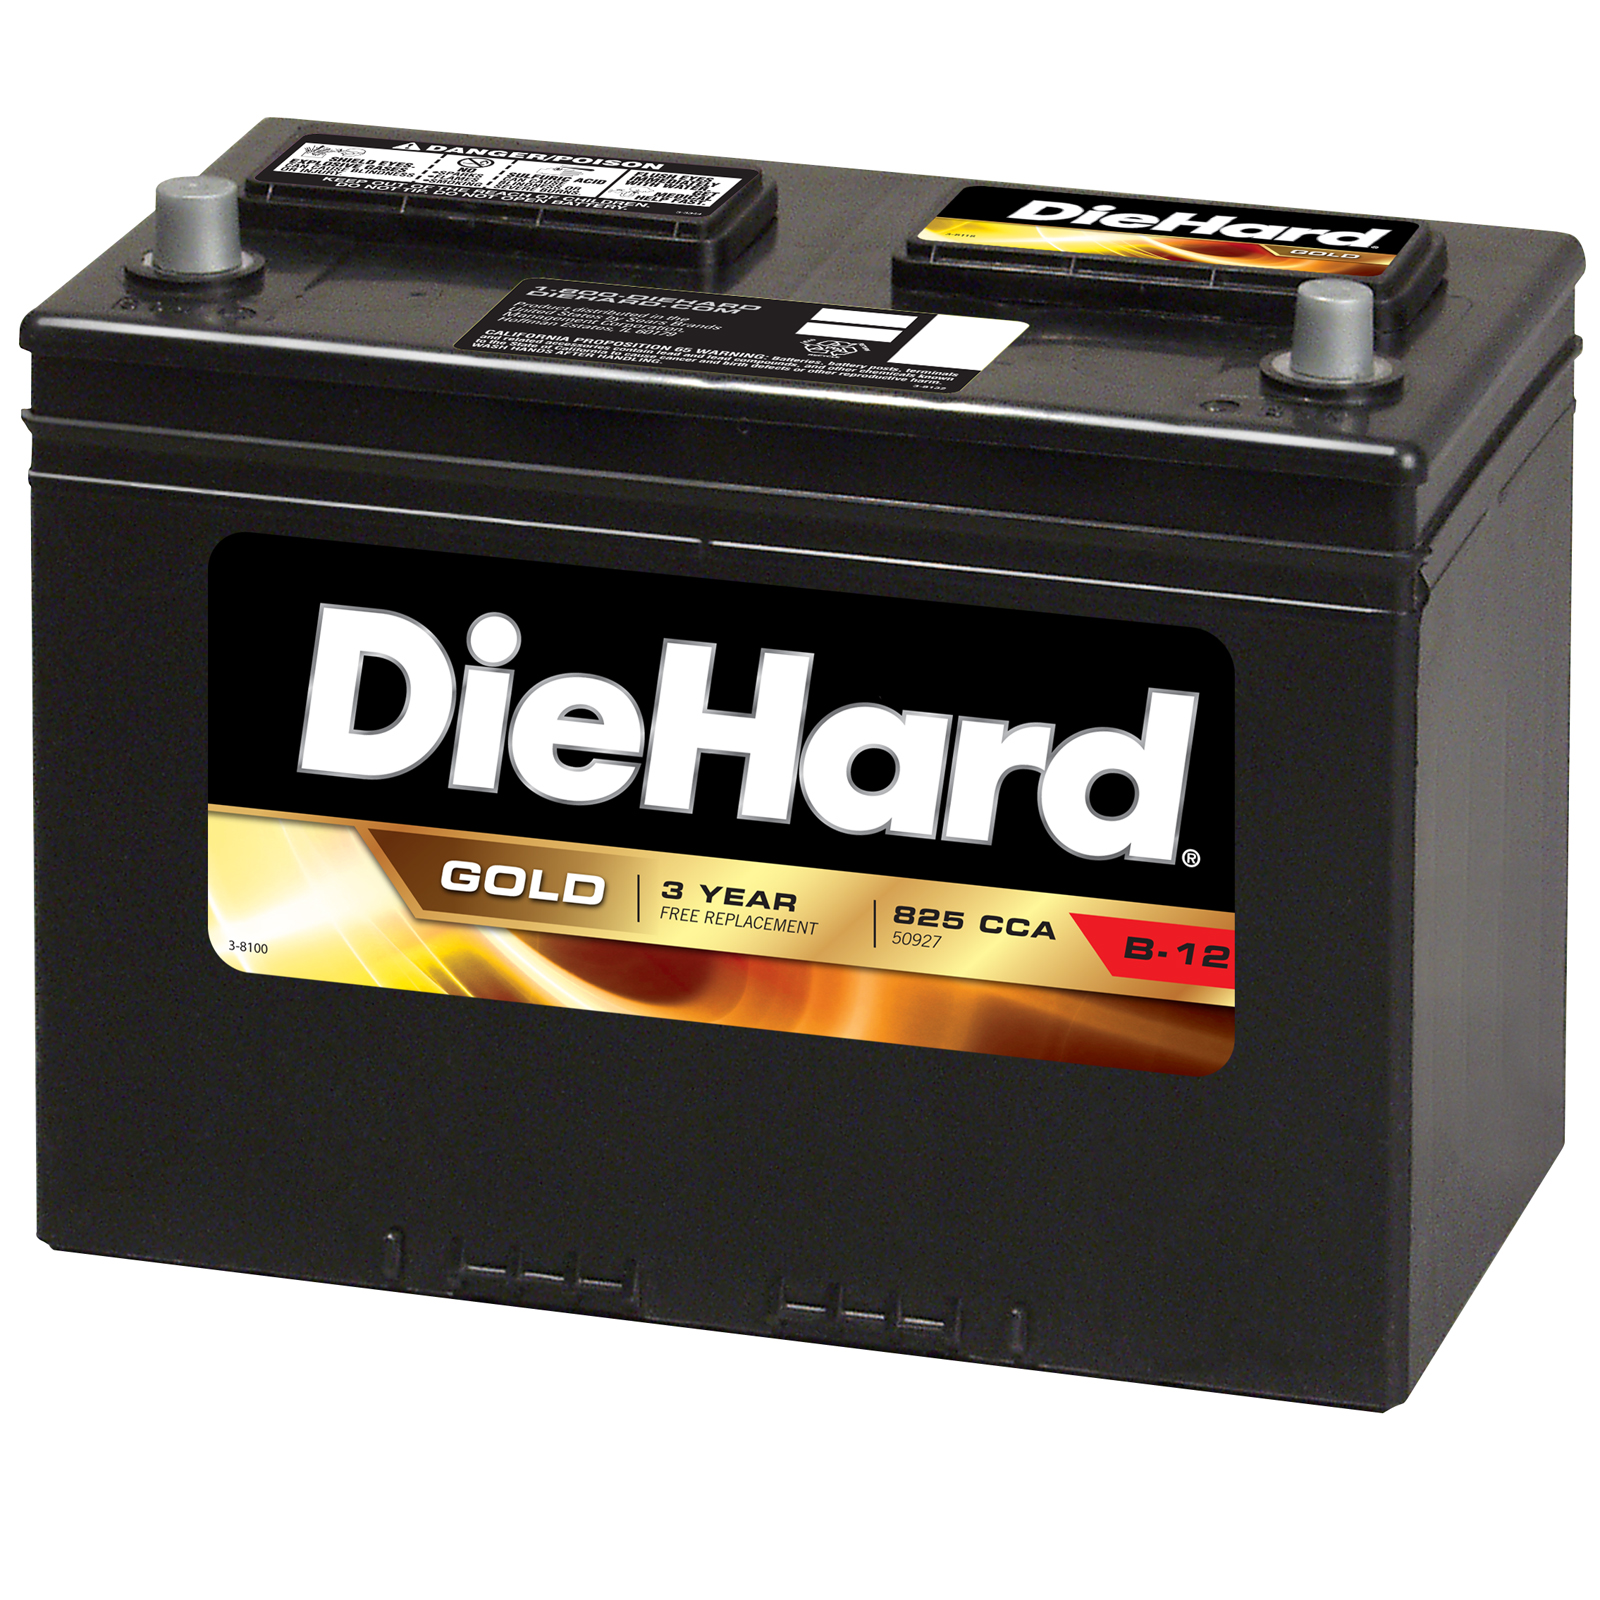 DieHard Gold Automotive Battery - Group Size EP-27 (Price with Exchange)